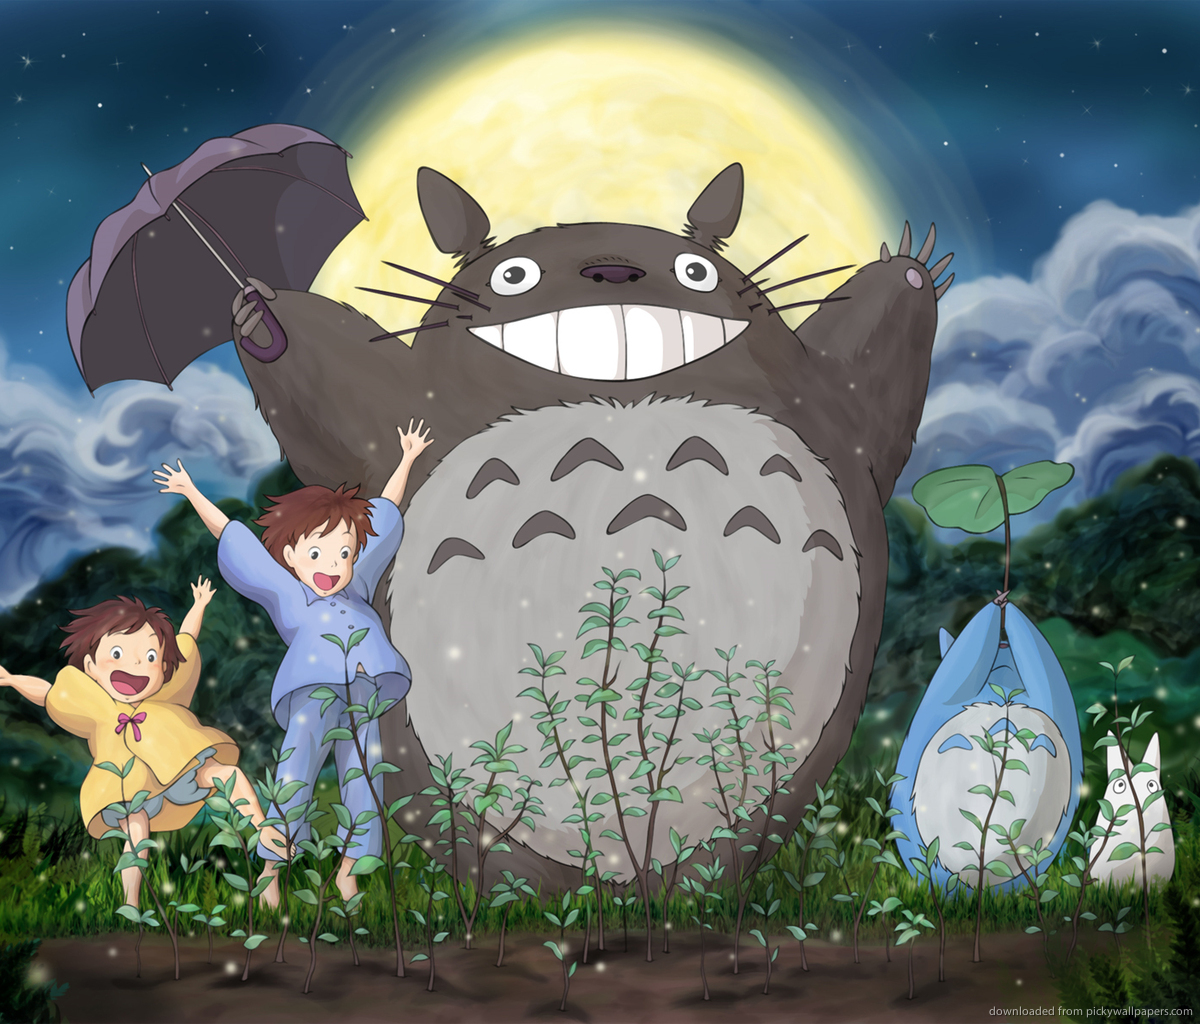 Download My Neighbor Totoro Awesome Wallpaper For Samsung Galaxy Tab